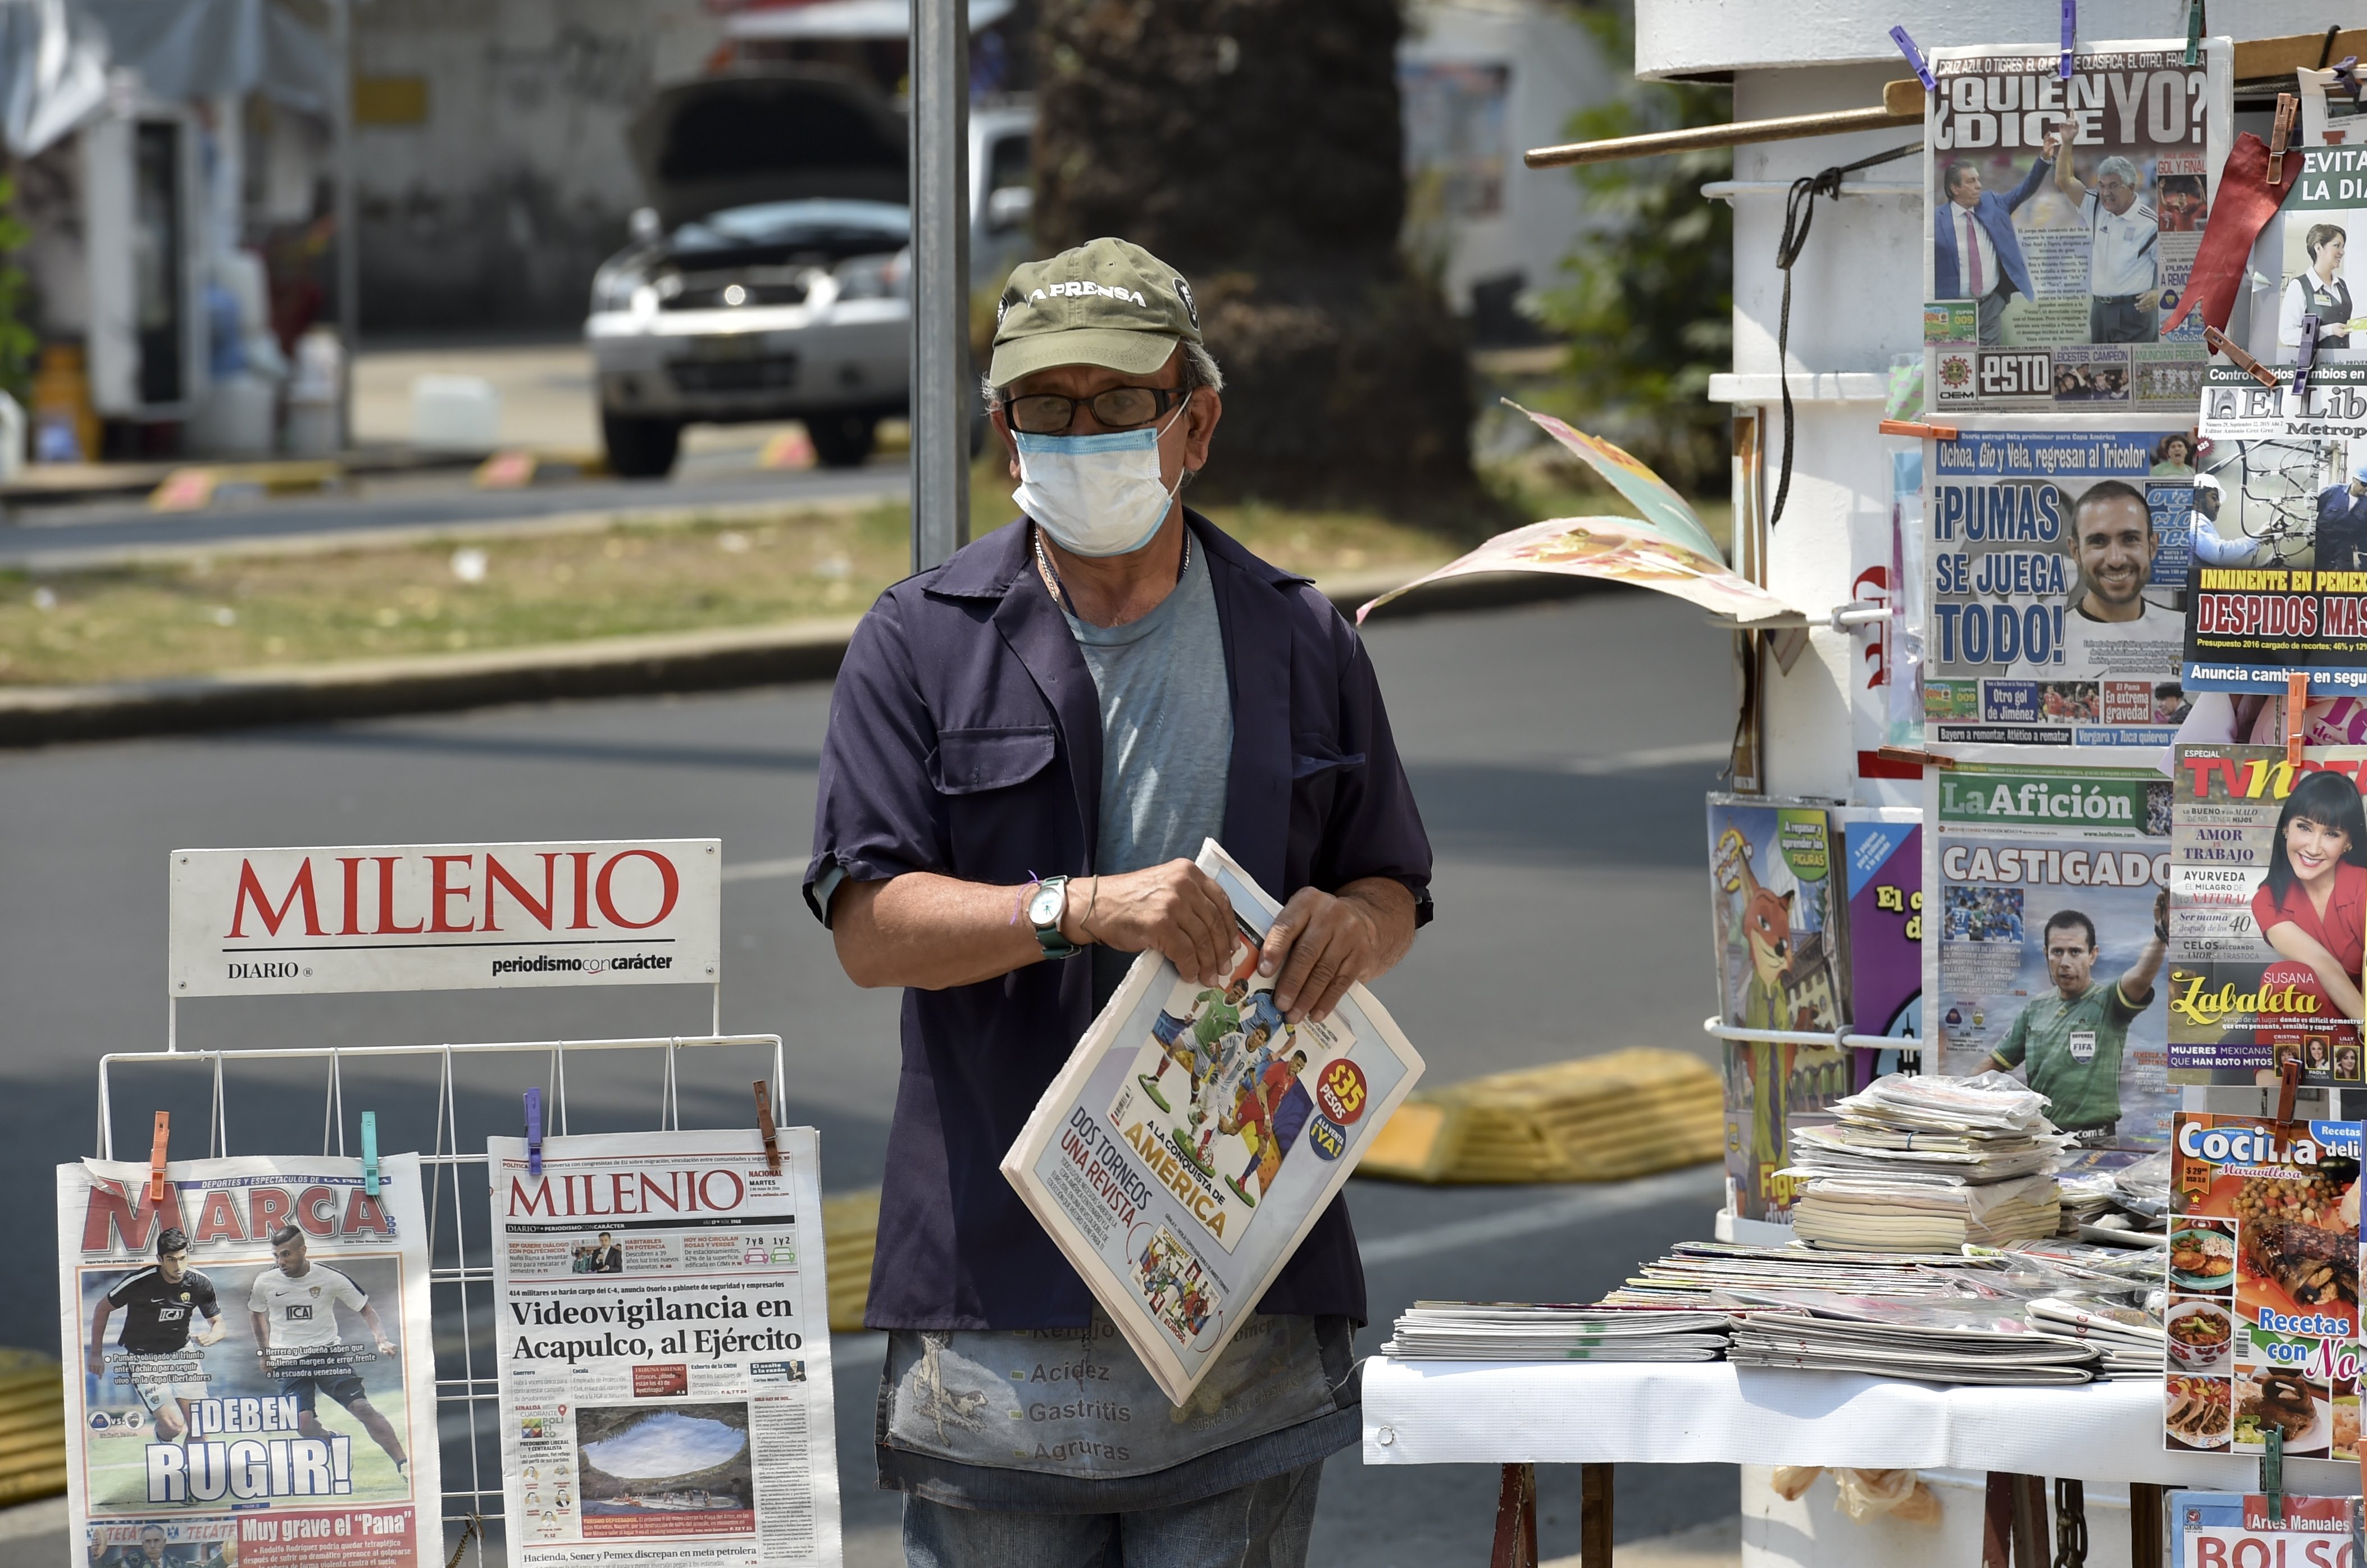 A newspapers vendor wears a surgical mask in smog-covered Mexico City on May 3, 2016 Mexico City officials issued a new air pollution alert yesterday, meaning that 40 percent of vehicles will be banned on Tuesday, while industries will be required to cut emissions. The alarm was raised after ozone levels reached 161 points, above the 150 level. The threshold was lowered from 190 to 150 last month. / AFP PHOTO / YURI CORTEZ